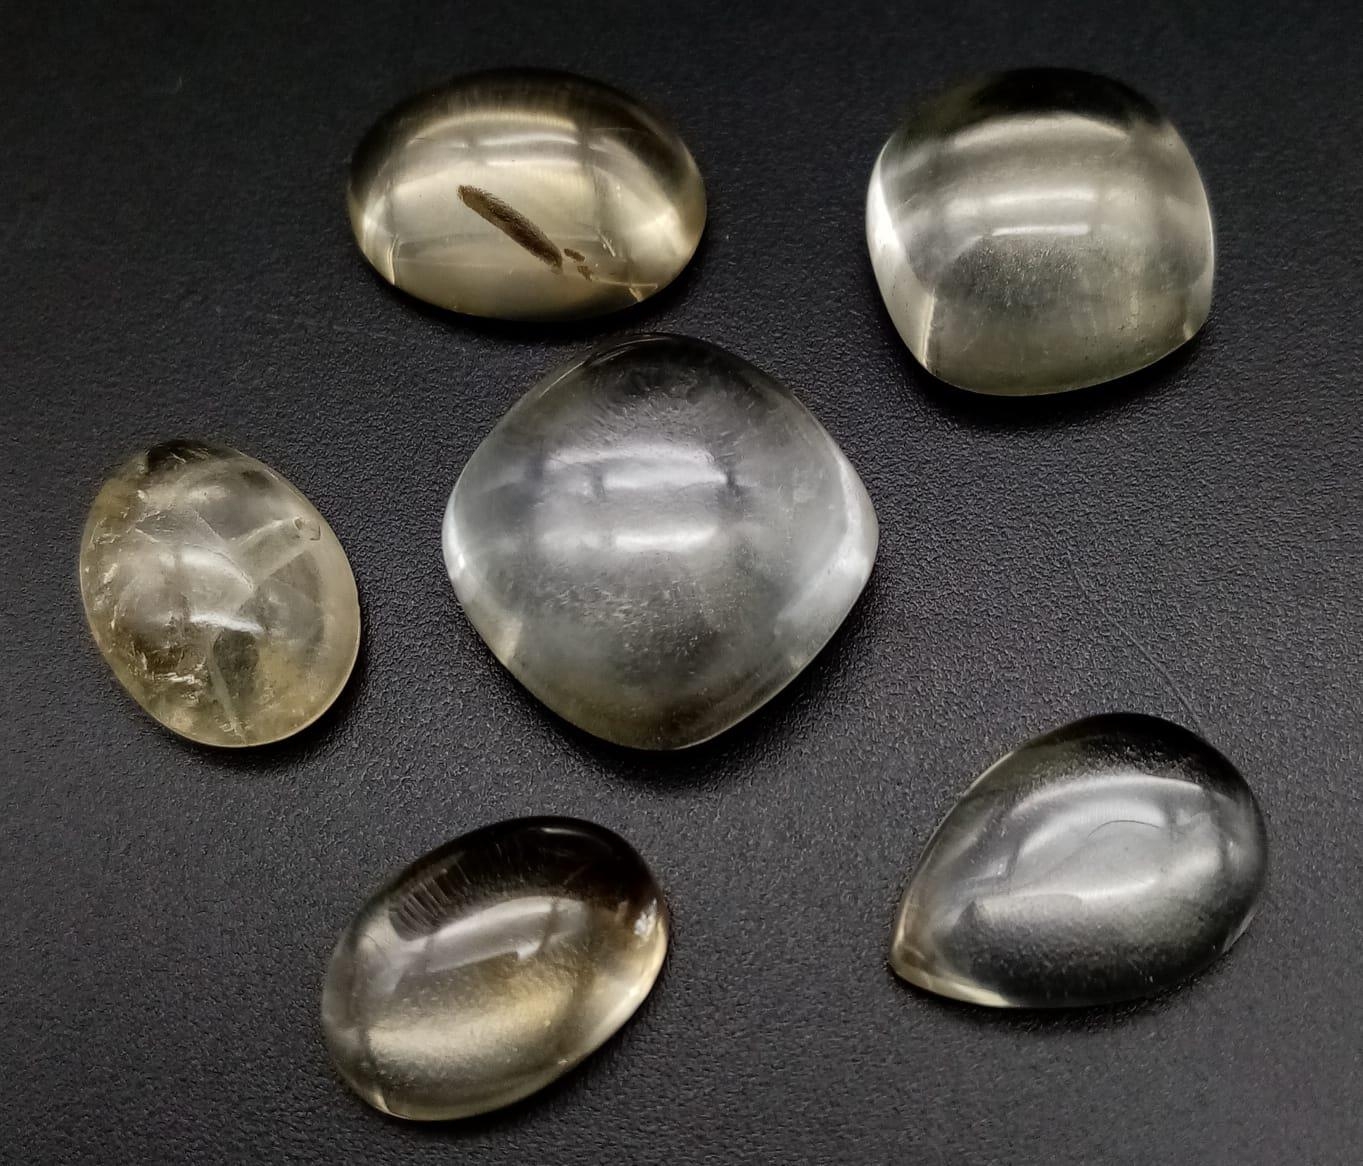 A Lot of 6 Pcs of 36.35 Ct Cabochon Citrine Gemstones in Mix Shapes.